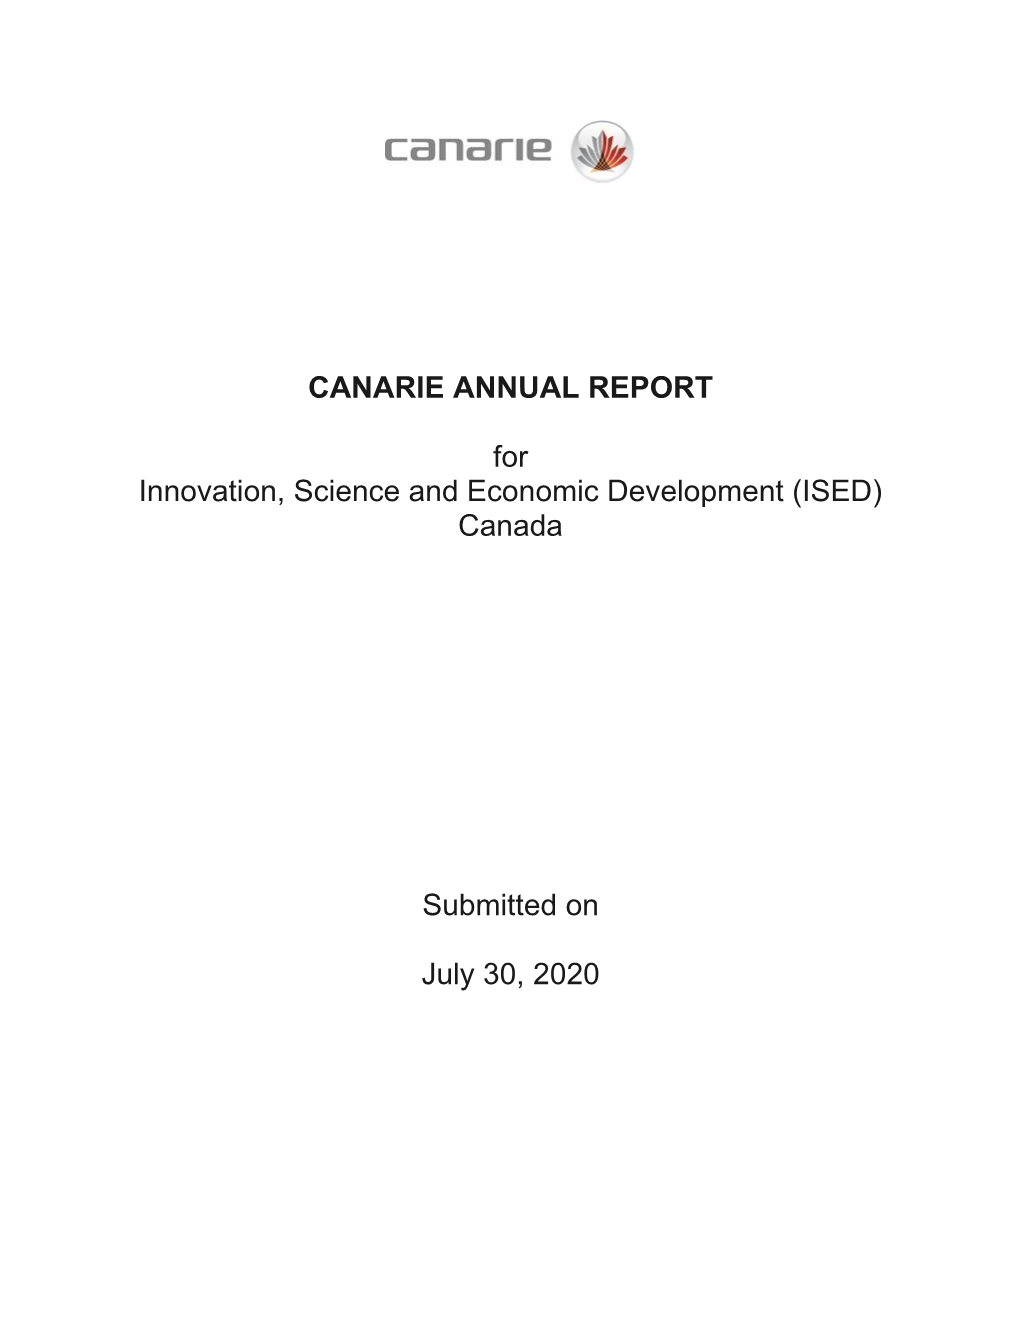 CANARIE ANNUAL REPORT for Innovation, Science and Economic